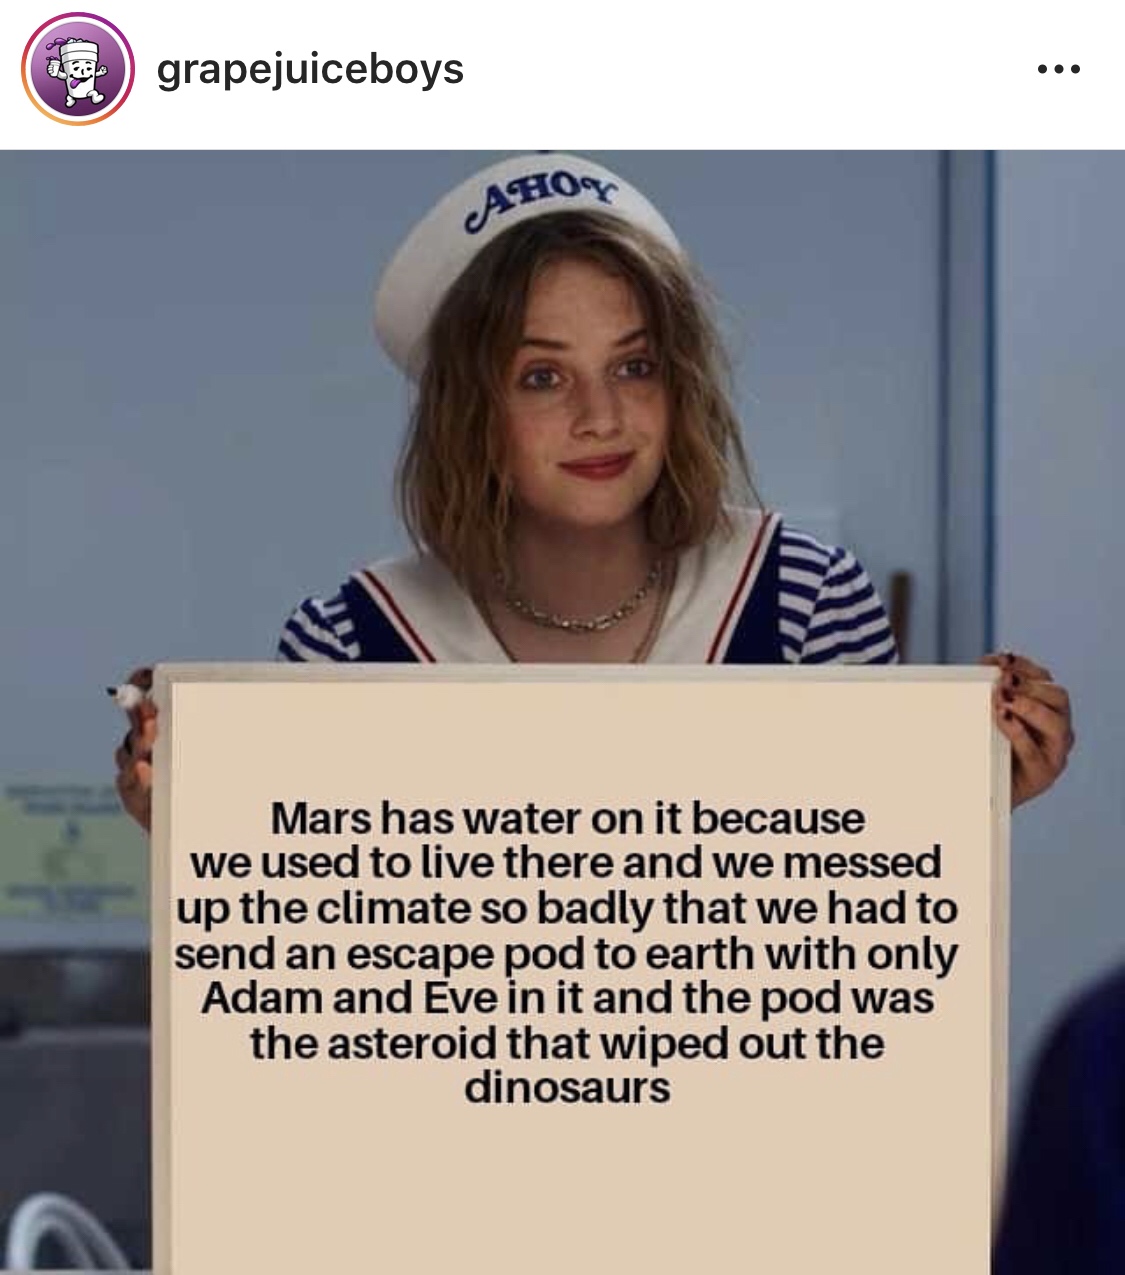 grapejuiceboys Ahor Mars has water on it because we used to live there and we messed up the climate so badly that we had to send an escape pod to earth with only Adam and Eve in it and the pod was the asteroid that wiped out the dinosaurs